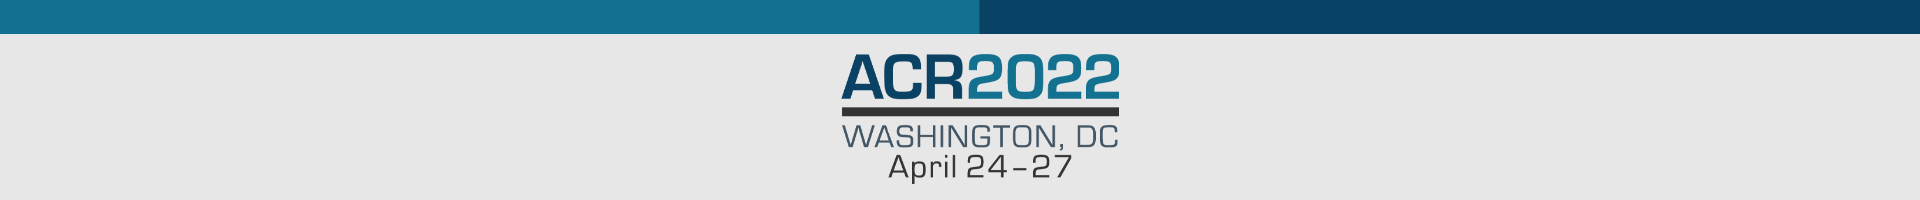 ACR 2022 Annual Meeting Event Banner